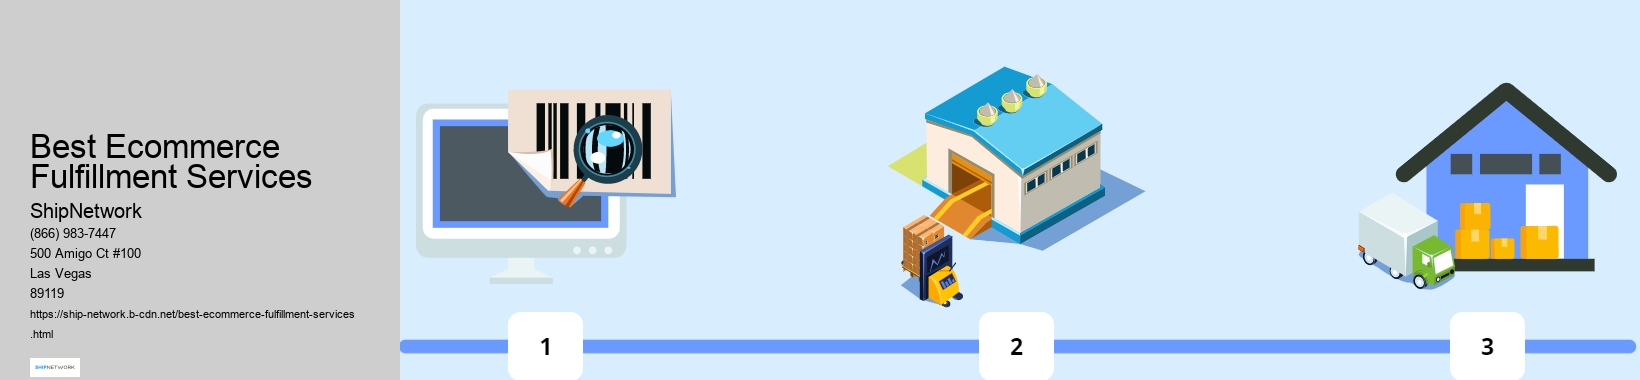 Best Ecommerce Fulfillment Services